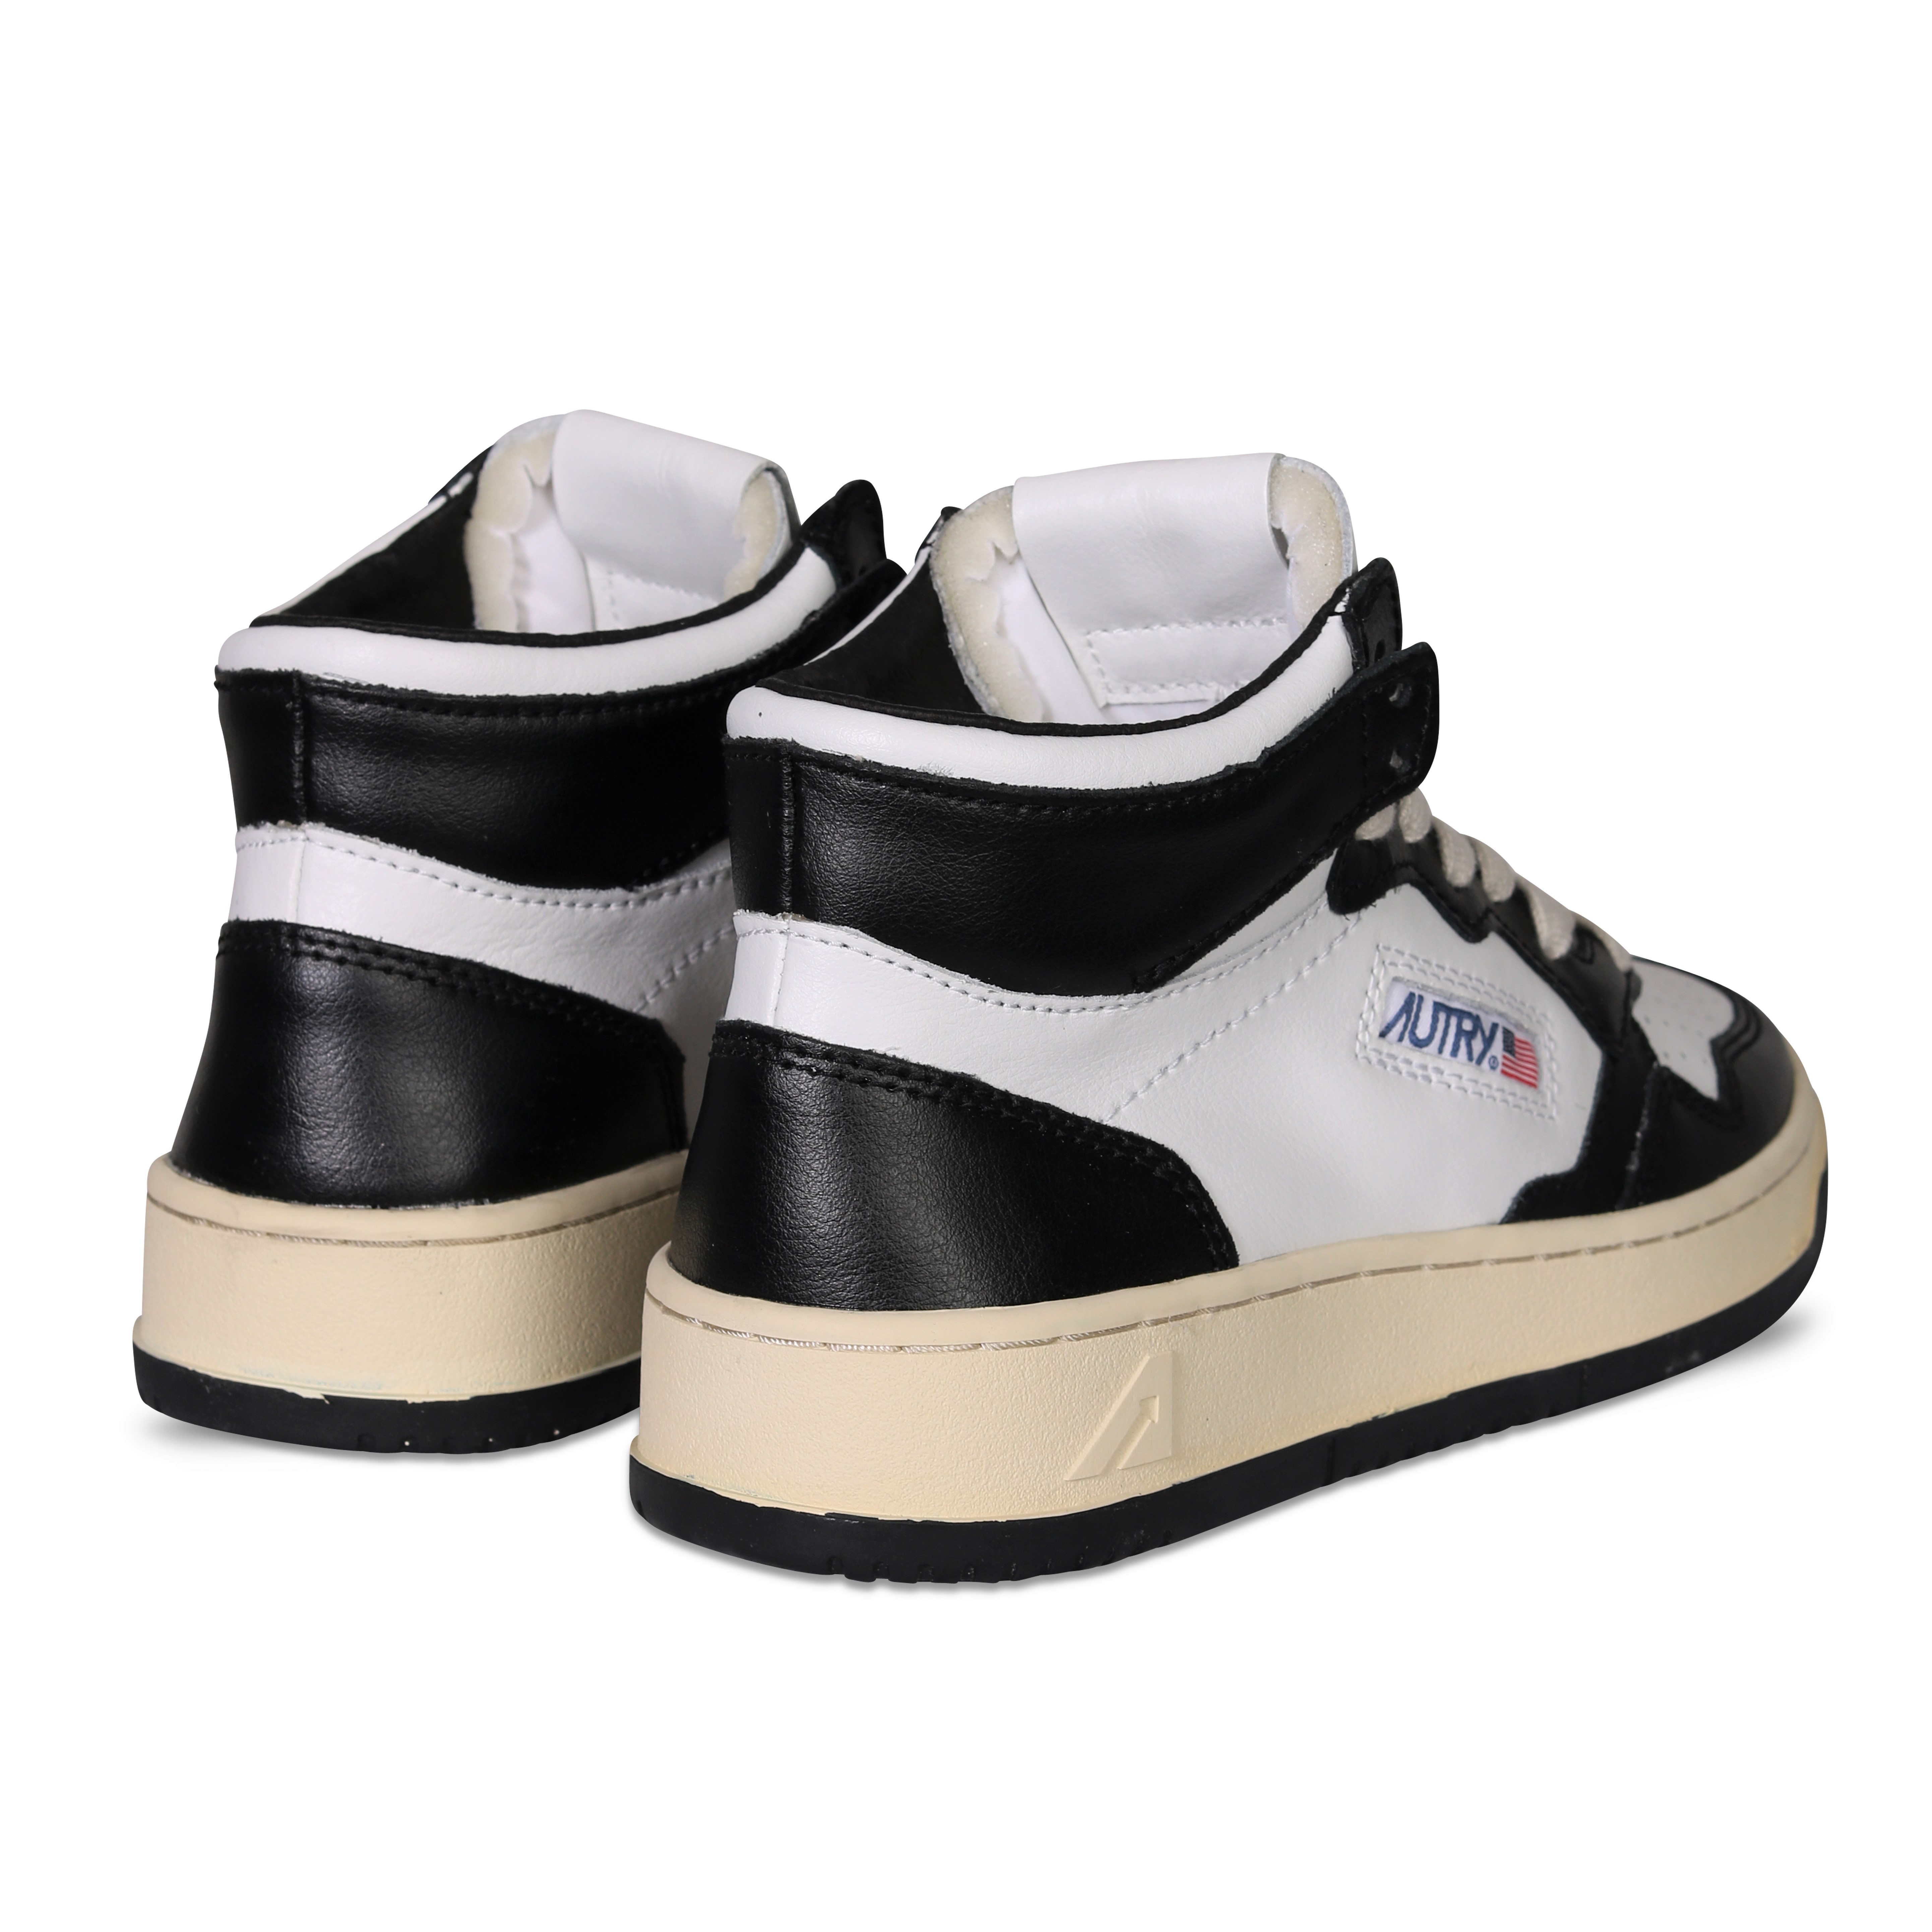 Autry Action Shoes Mid Sneaker White/Black